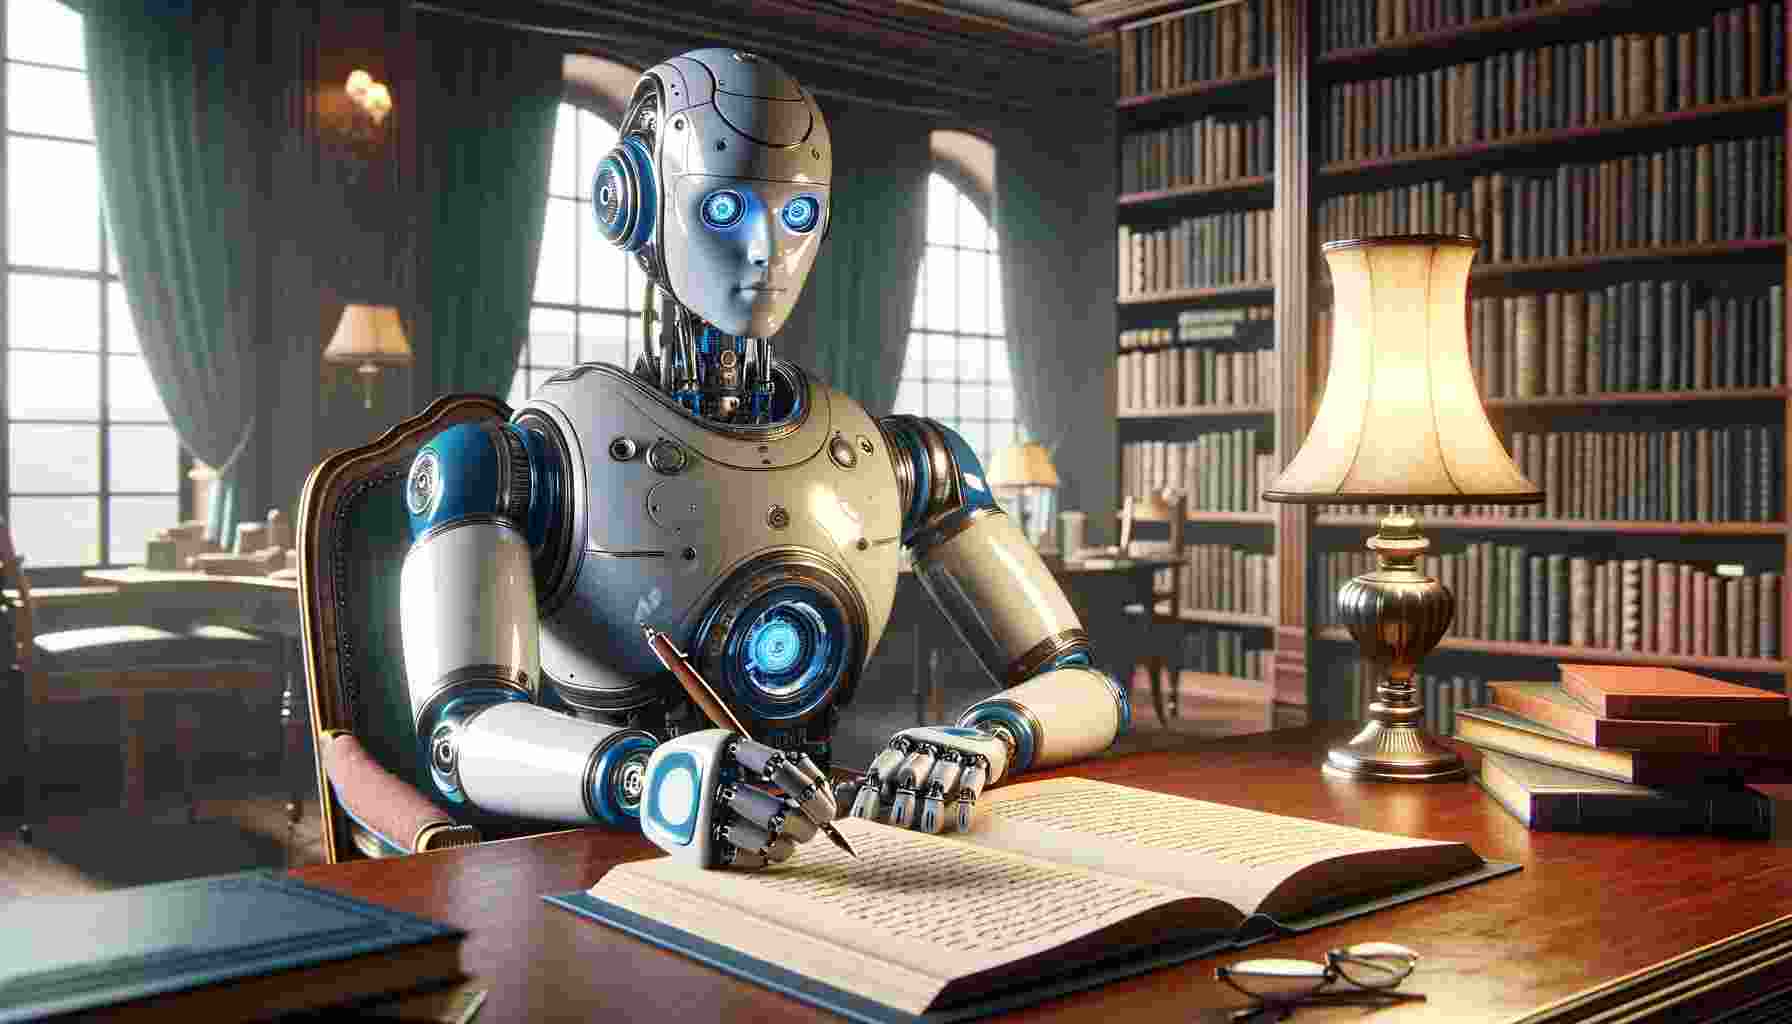 Why-Should-a-Writer-Use-an-AI-Story-Generator